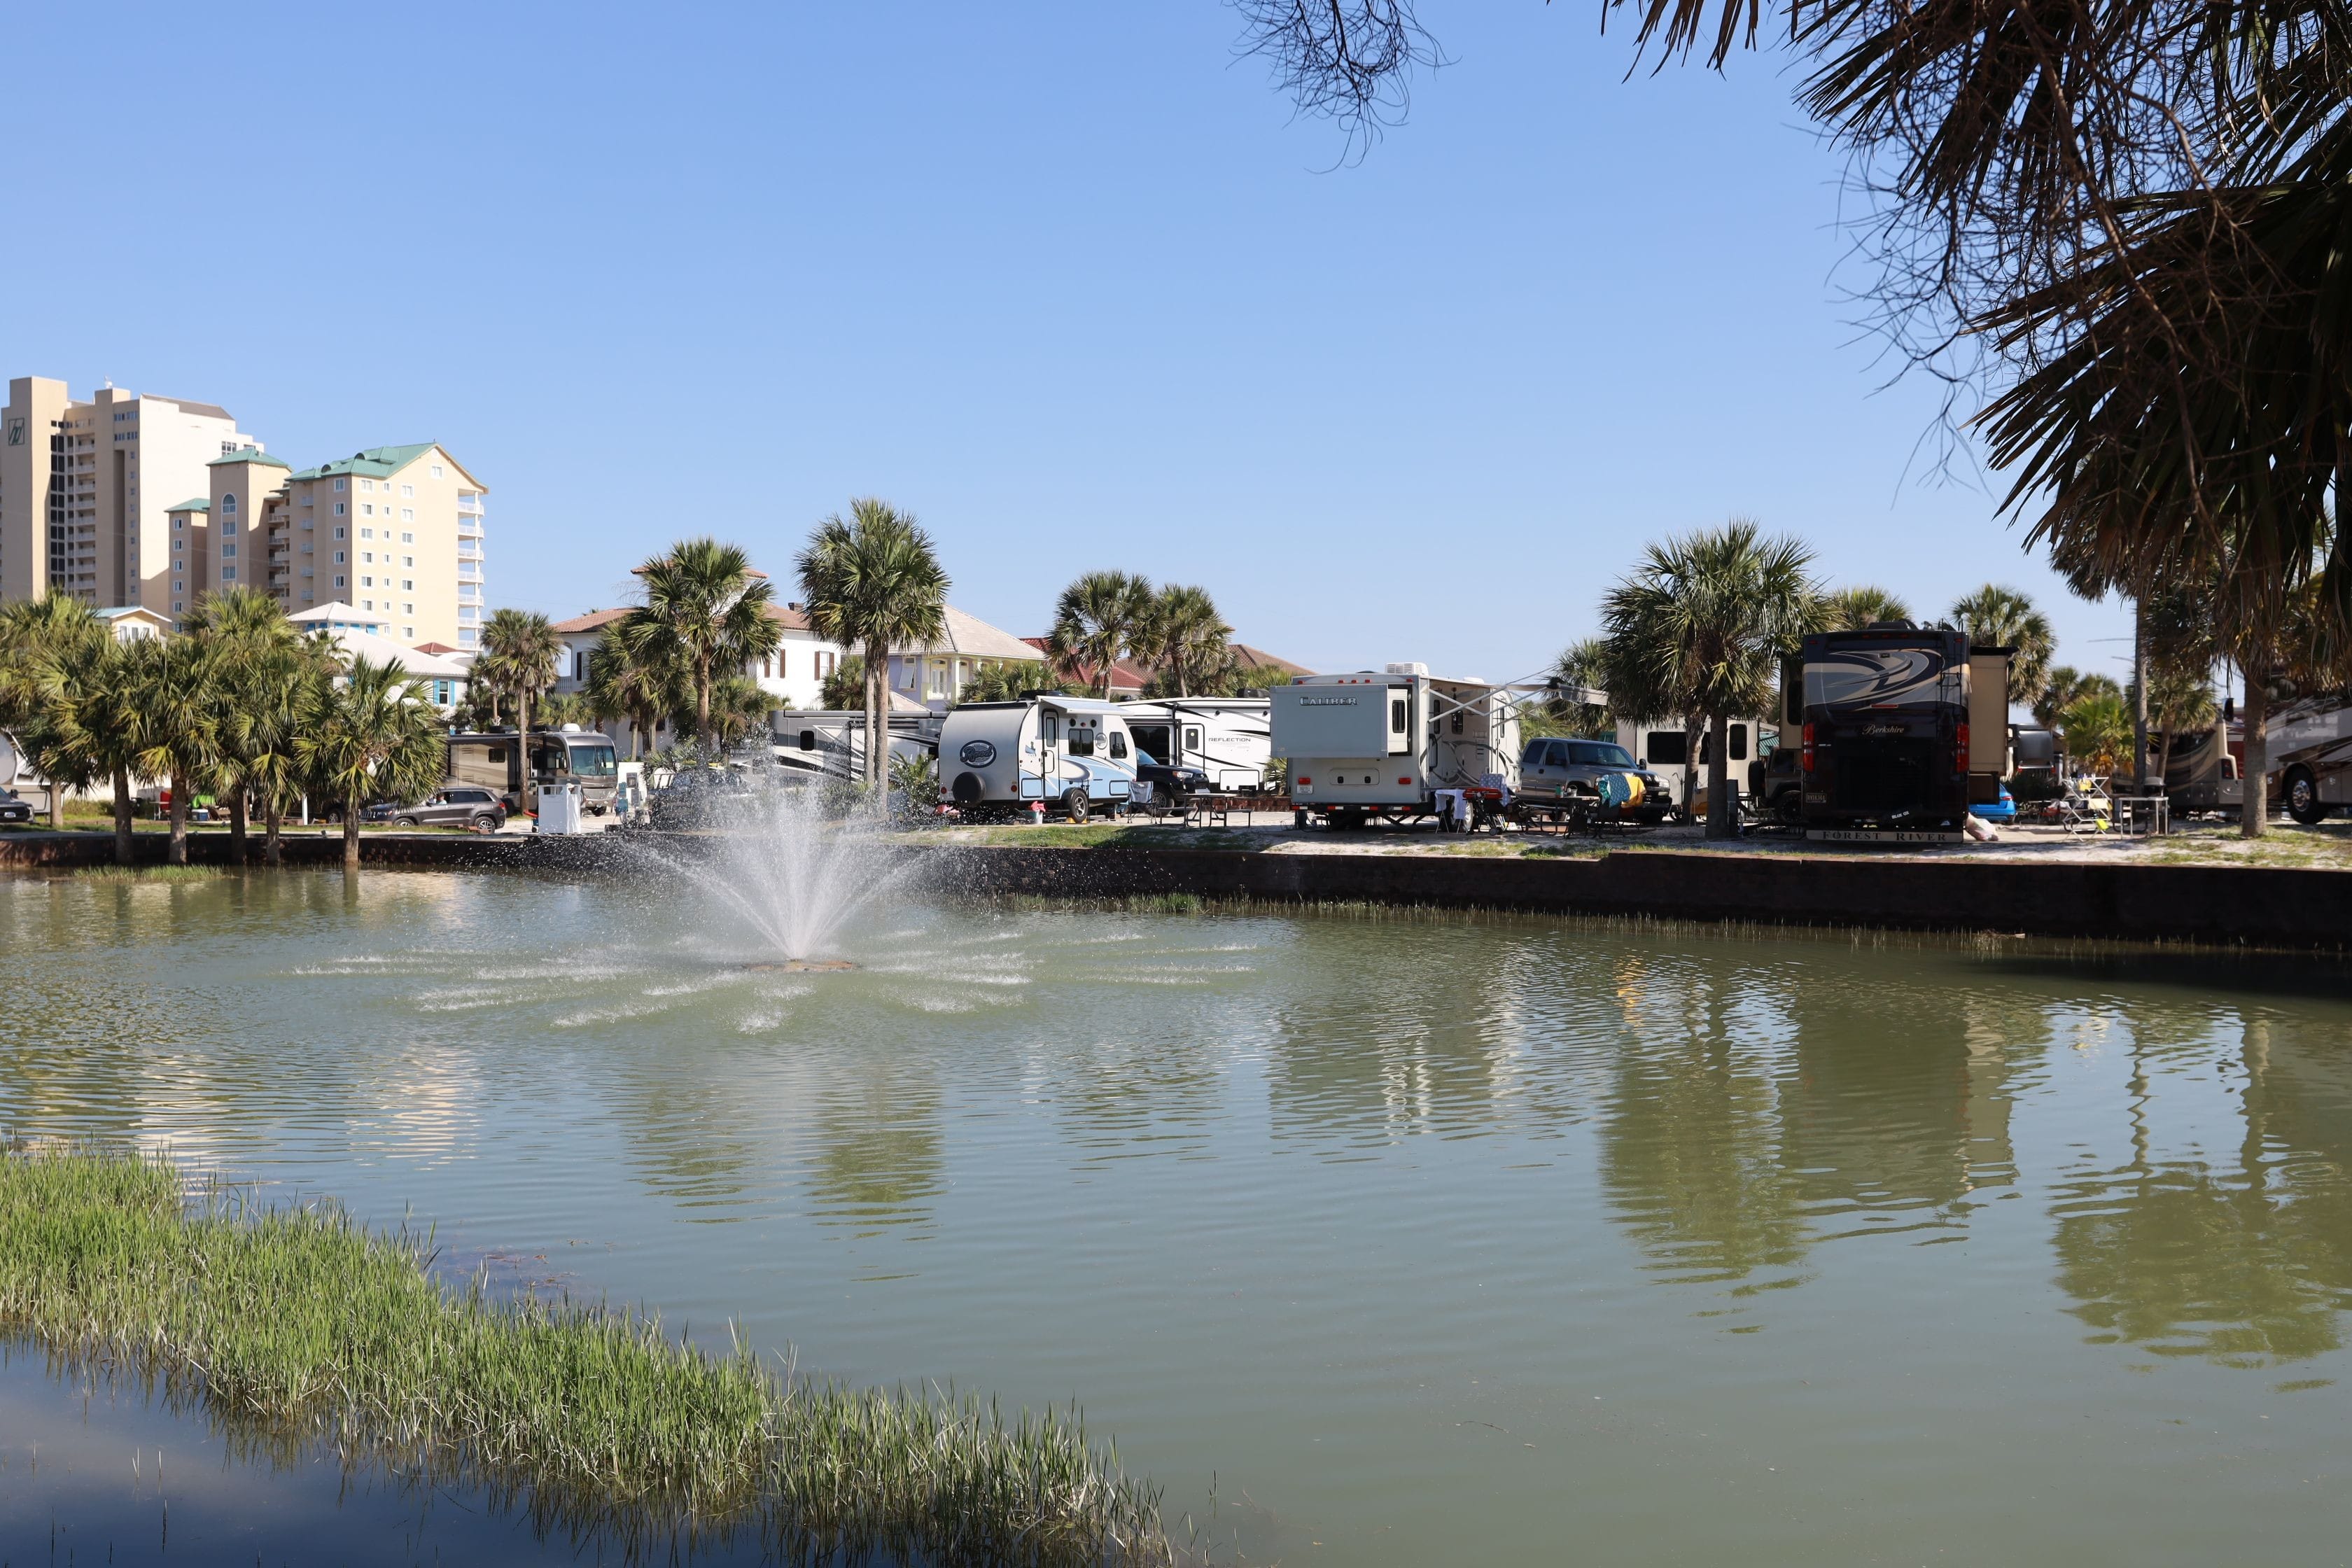 The Camping on the Gulf Pond and Fountain